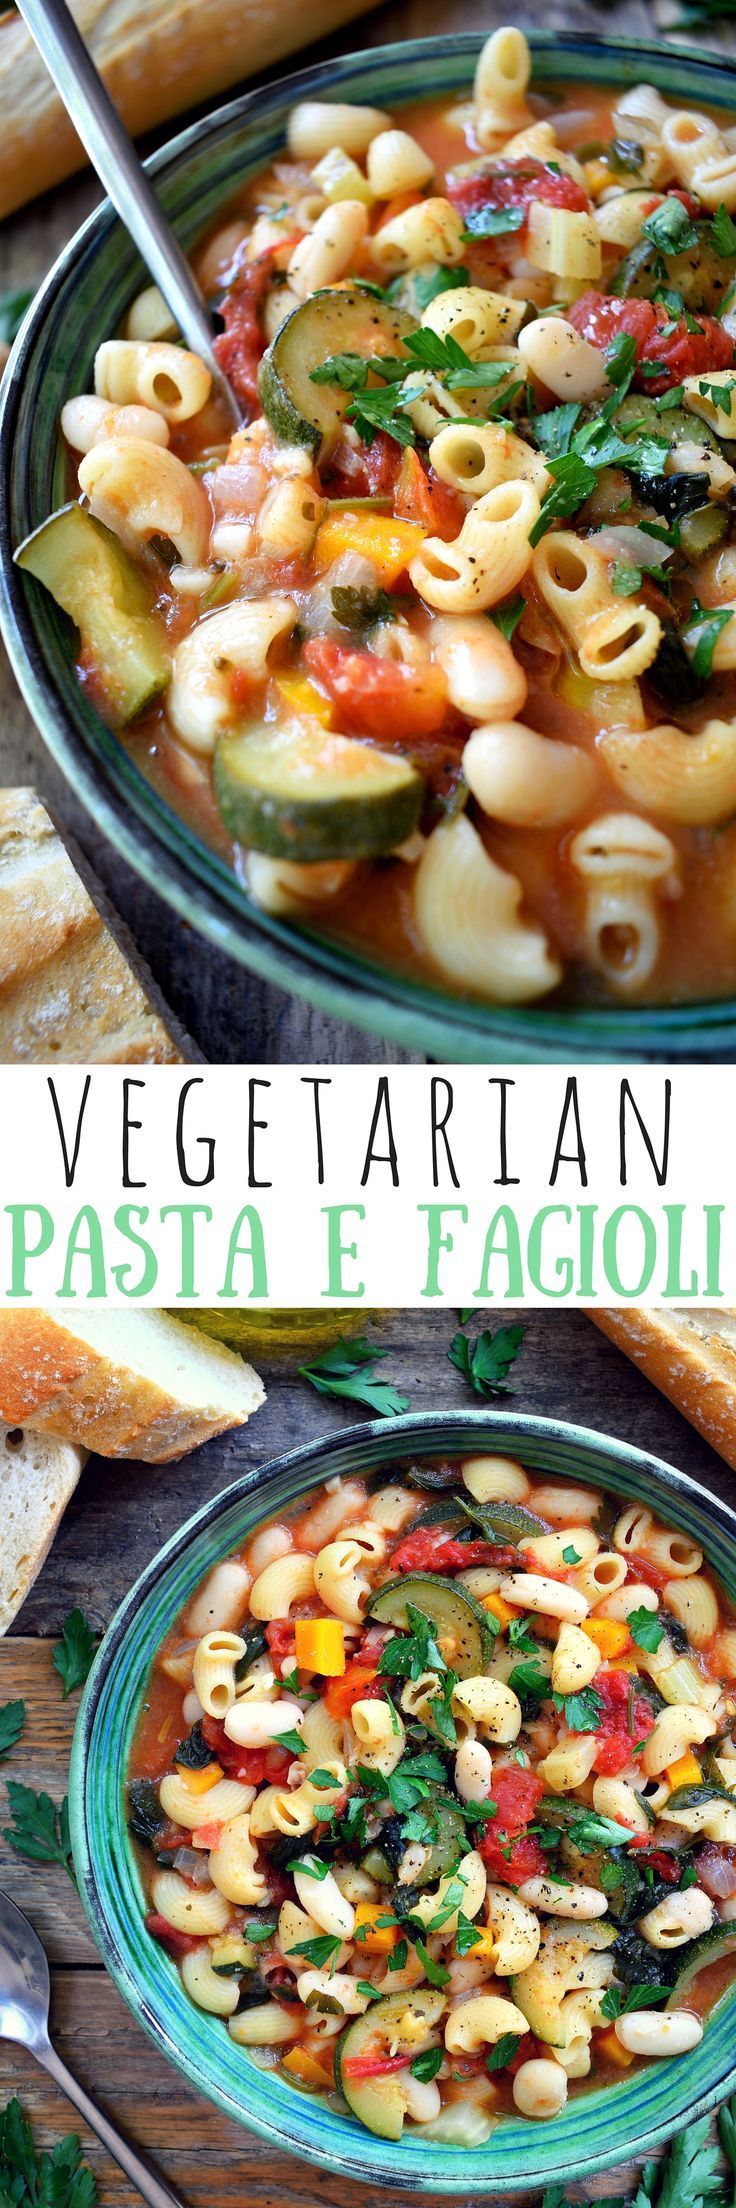 Vegetarian pasta fagioli is a simple, rustic Italian bean and pasta soup that’s extremely easy to make and can be on the table